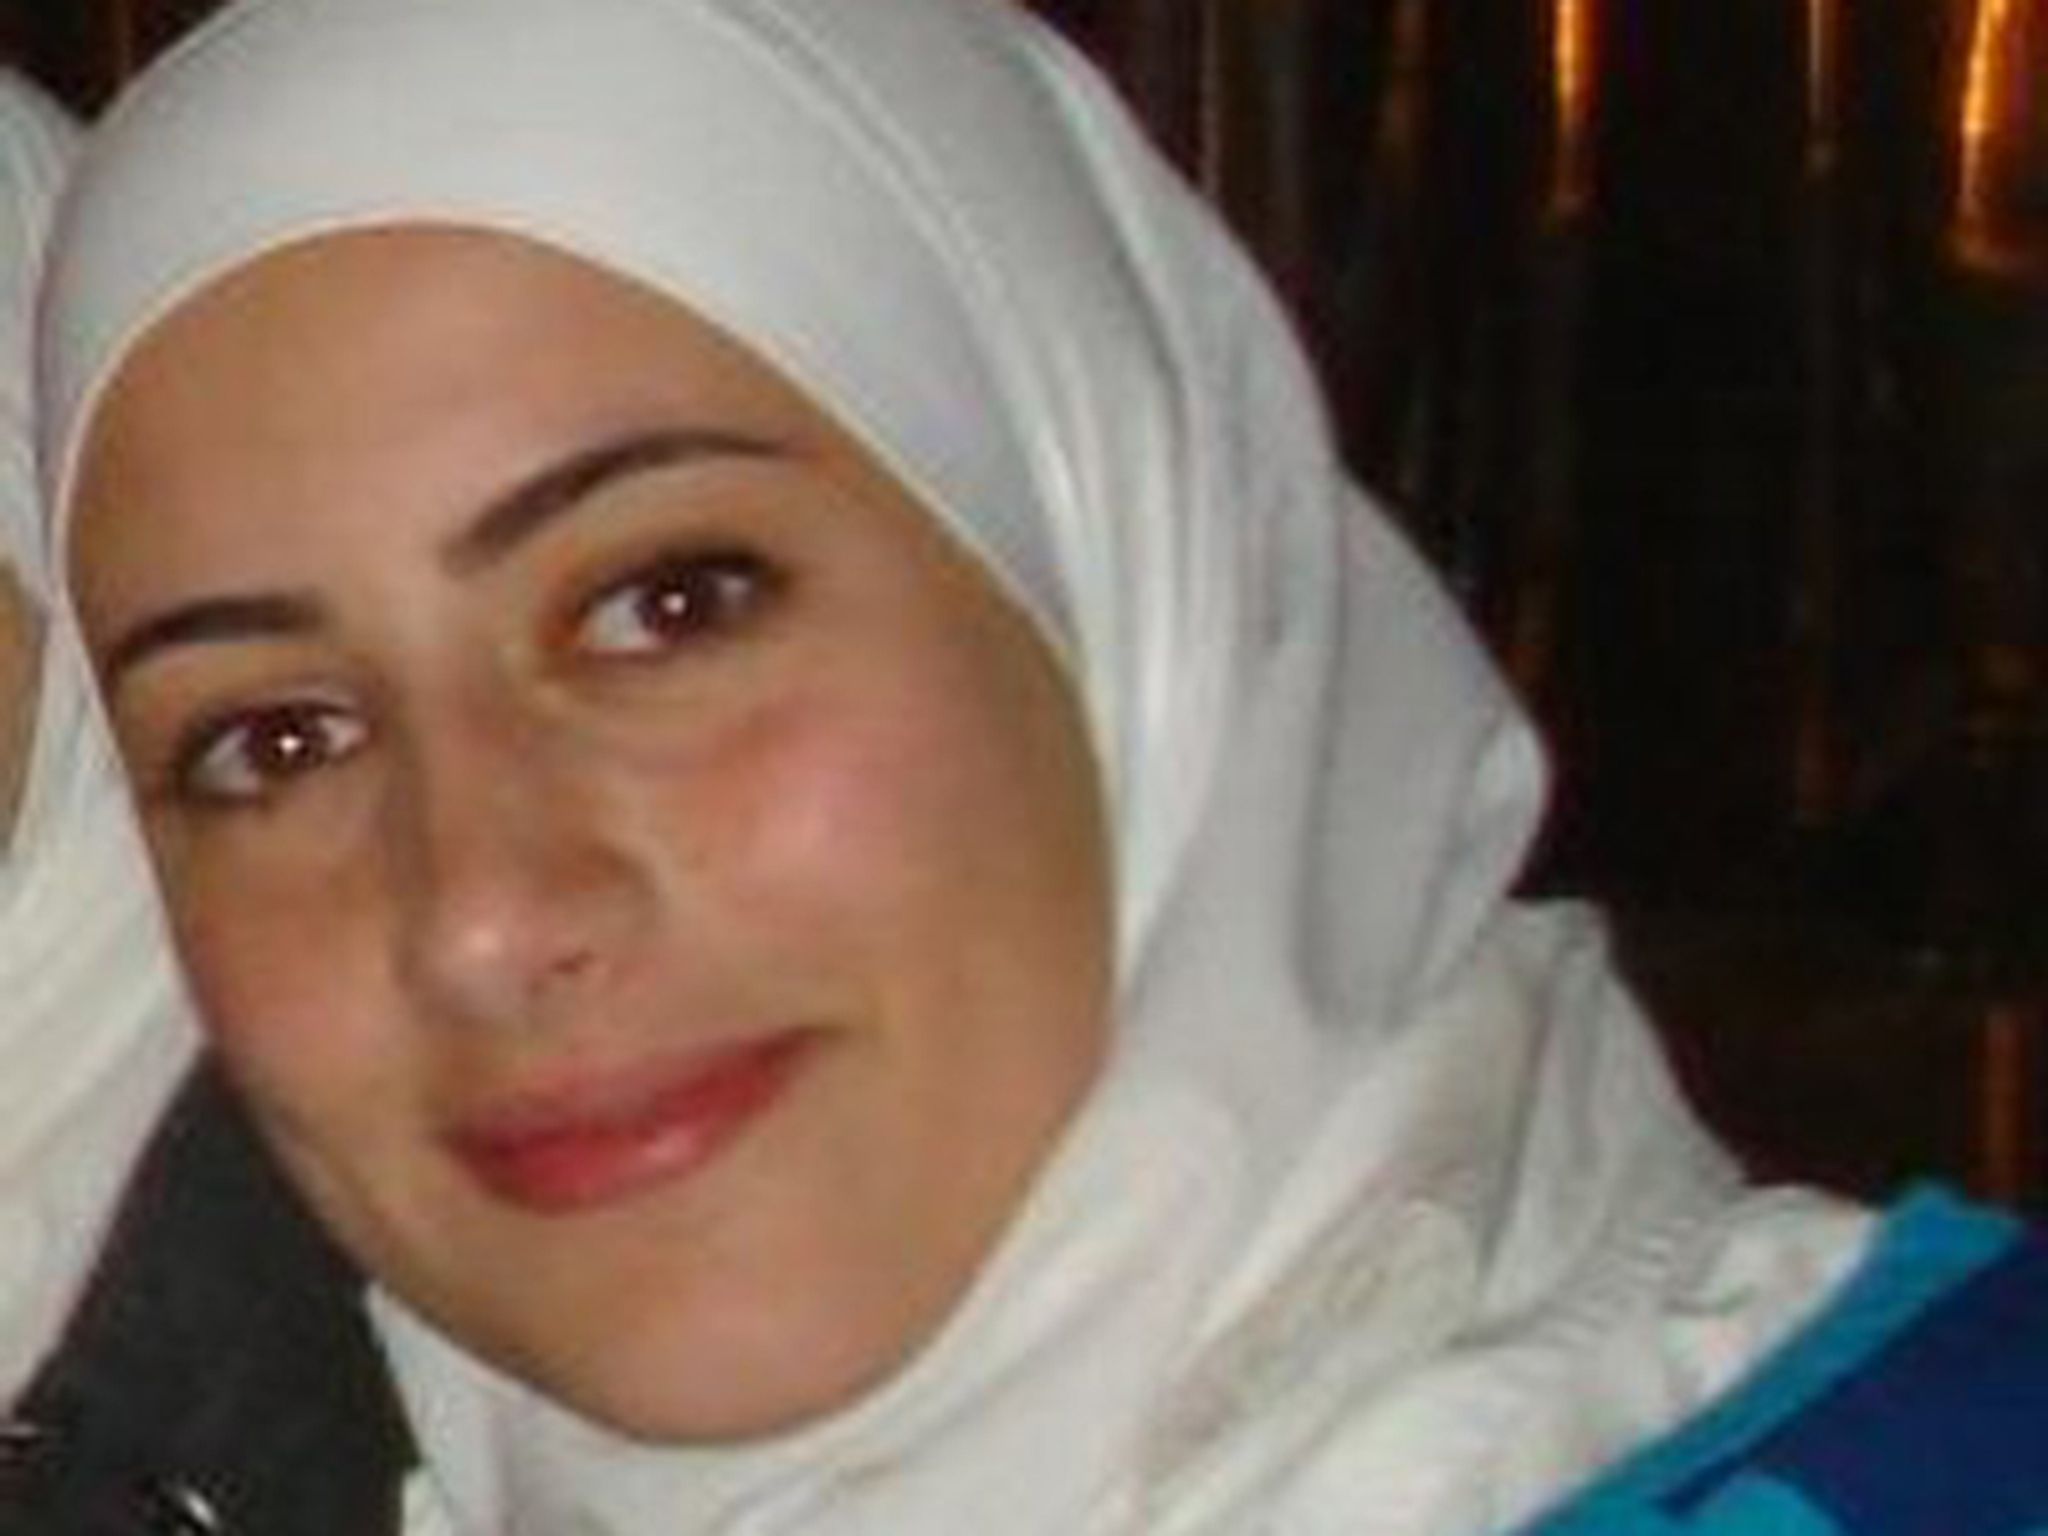 Layla Shweikani was arrested in Damascus in 2016